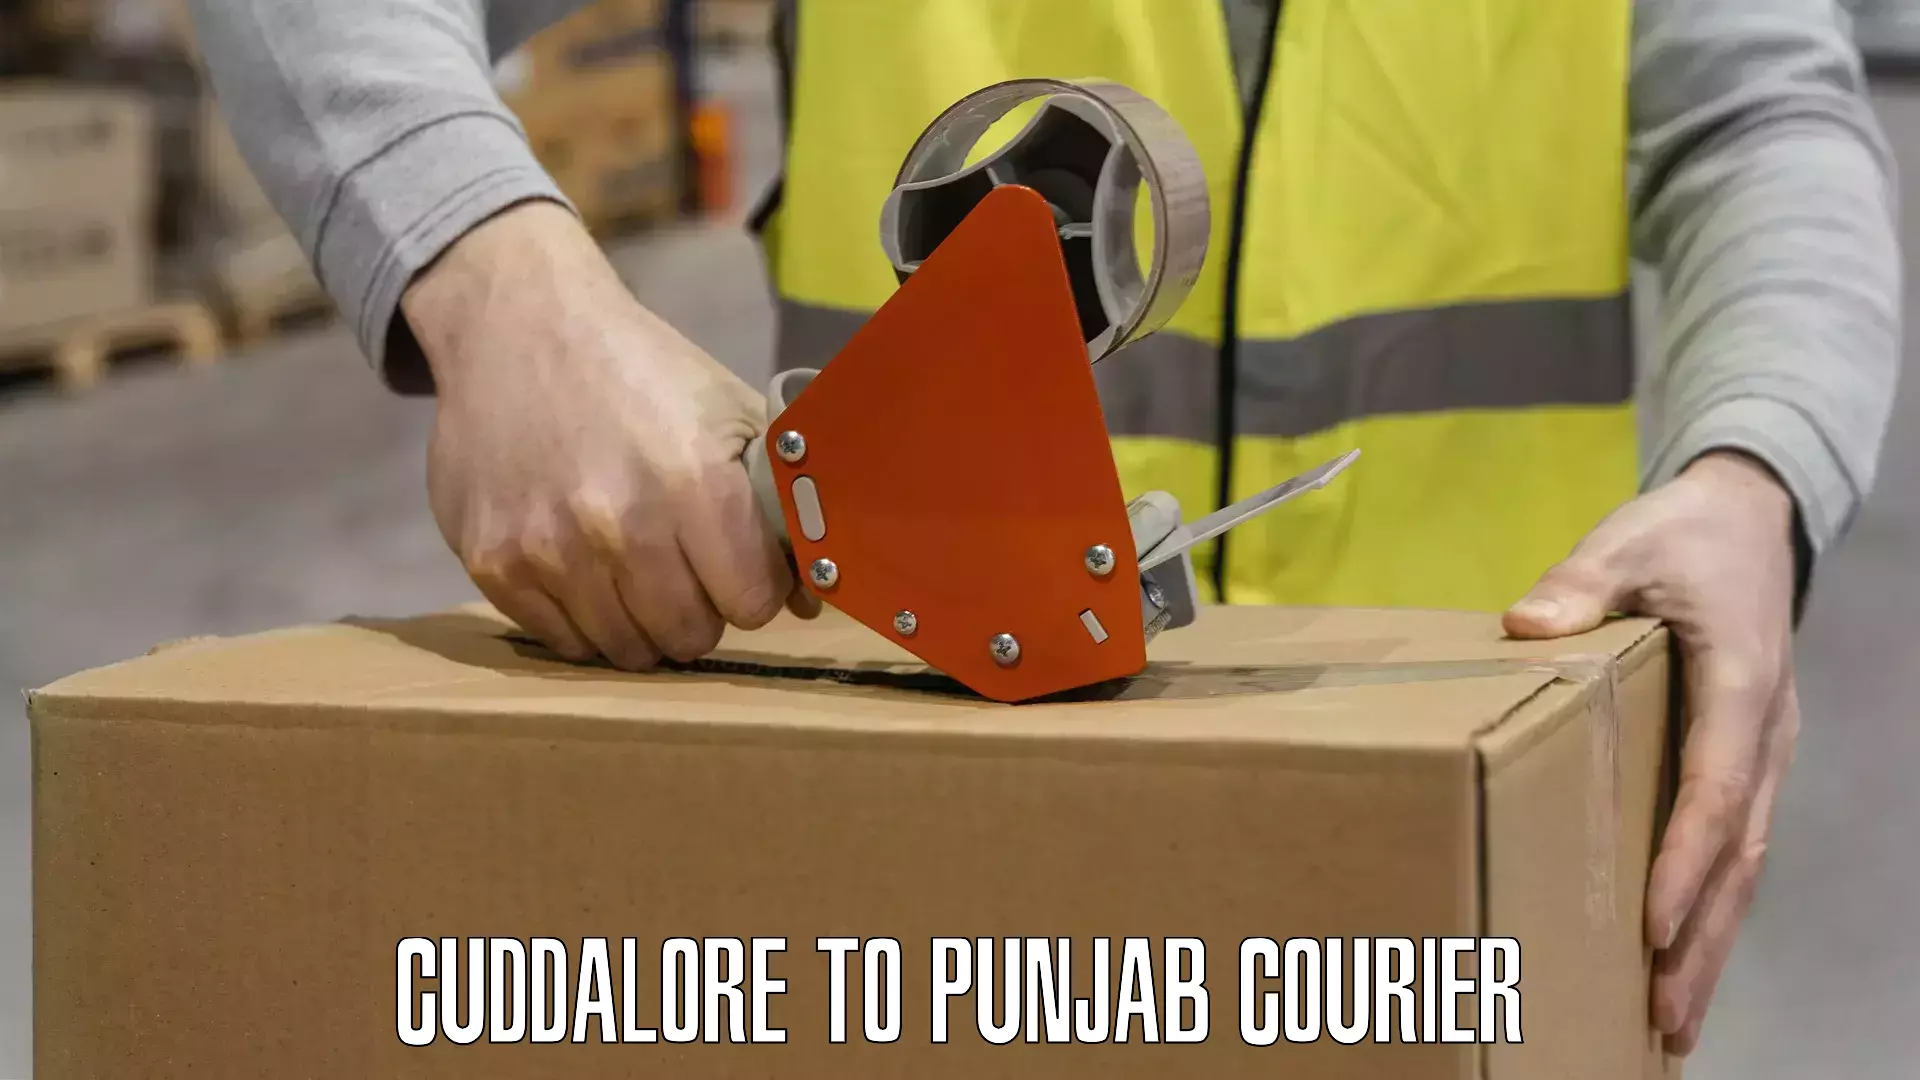 Business shipping needs Cuddalore to Mohali